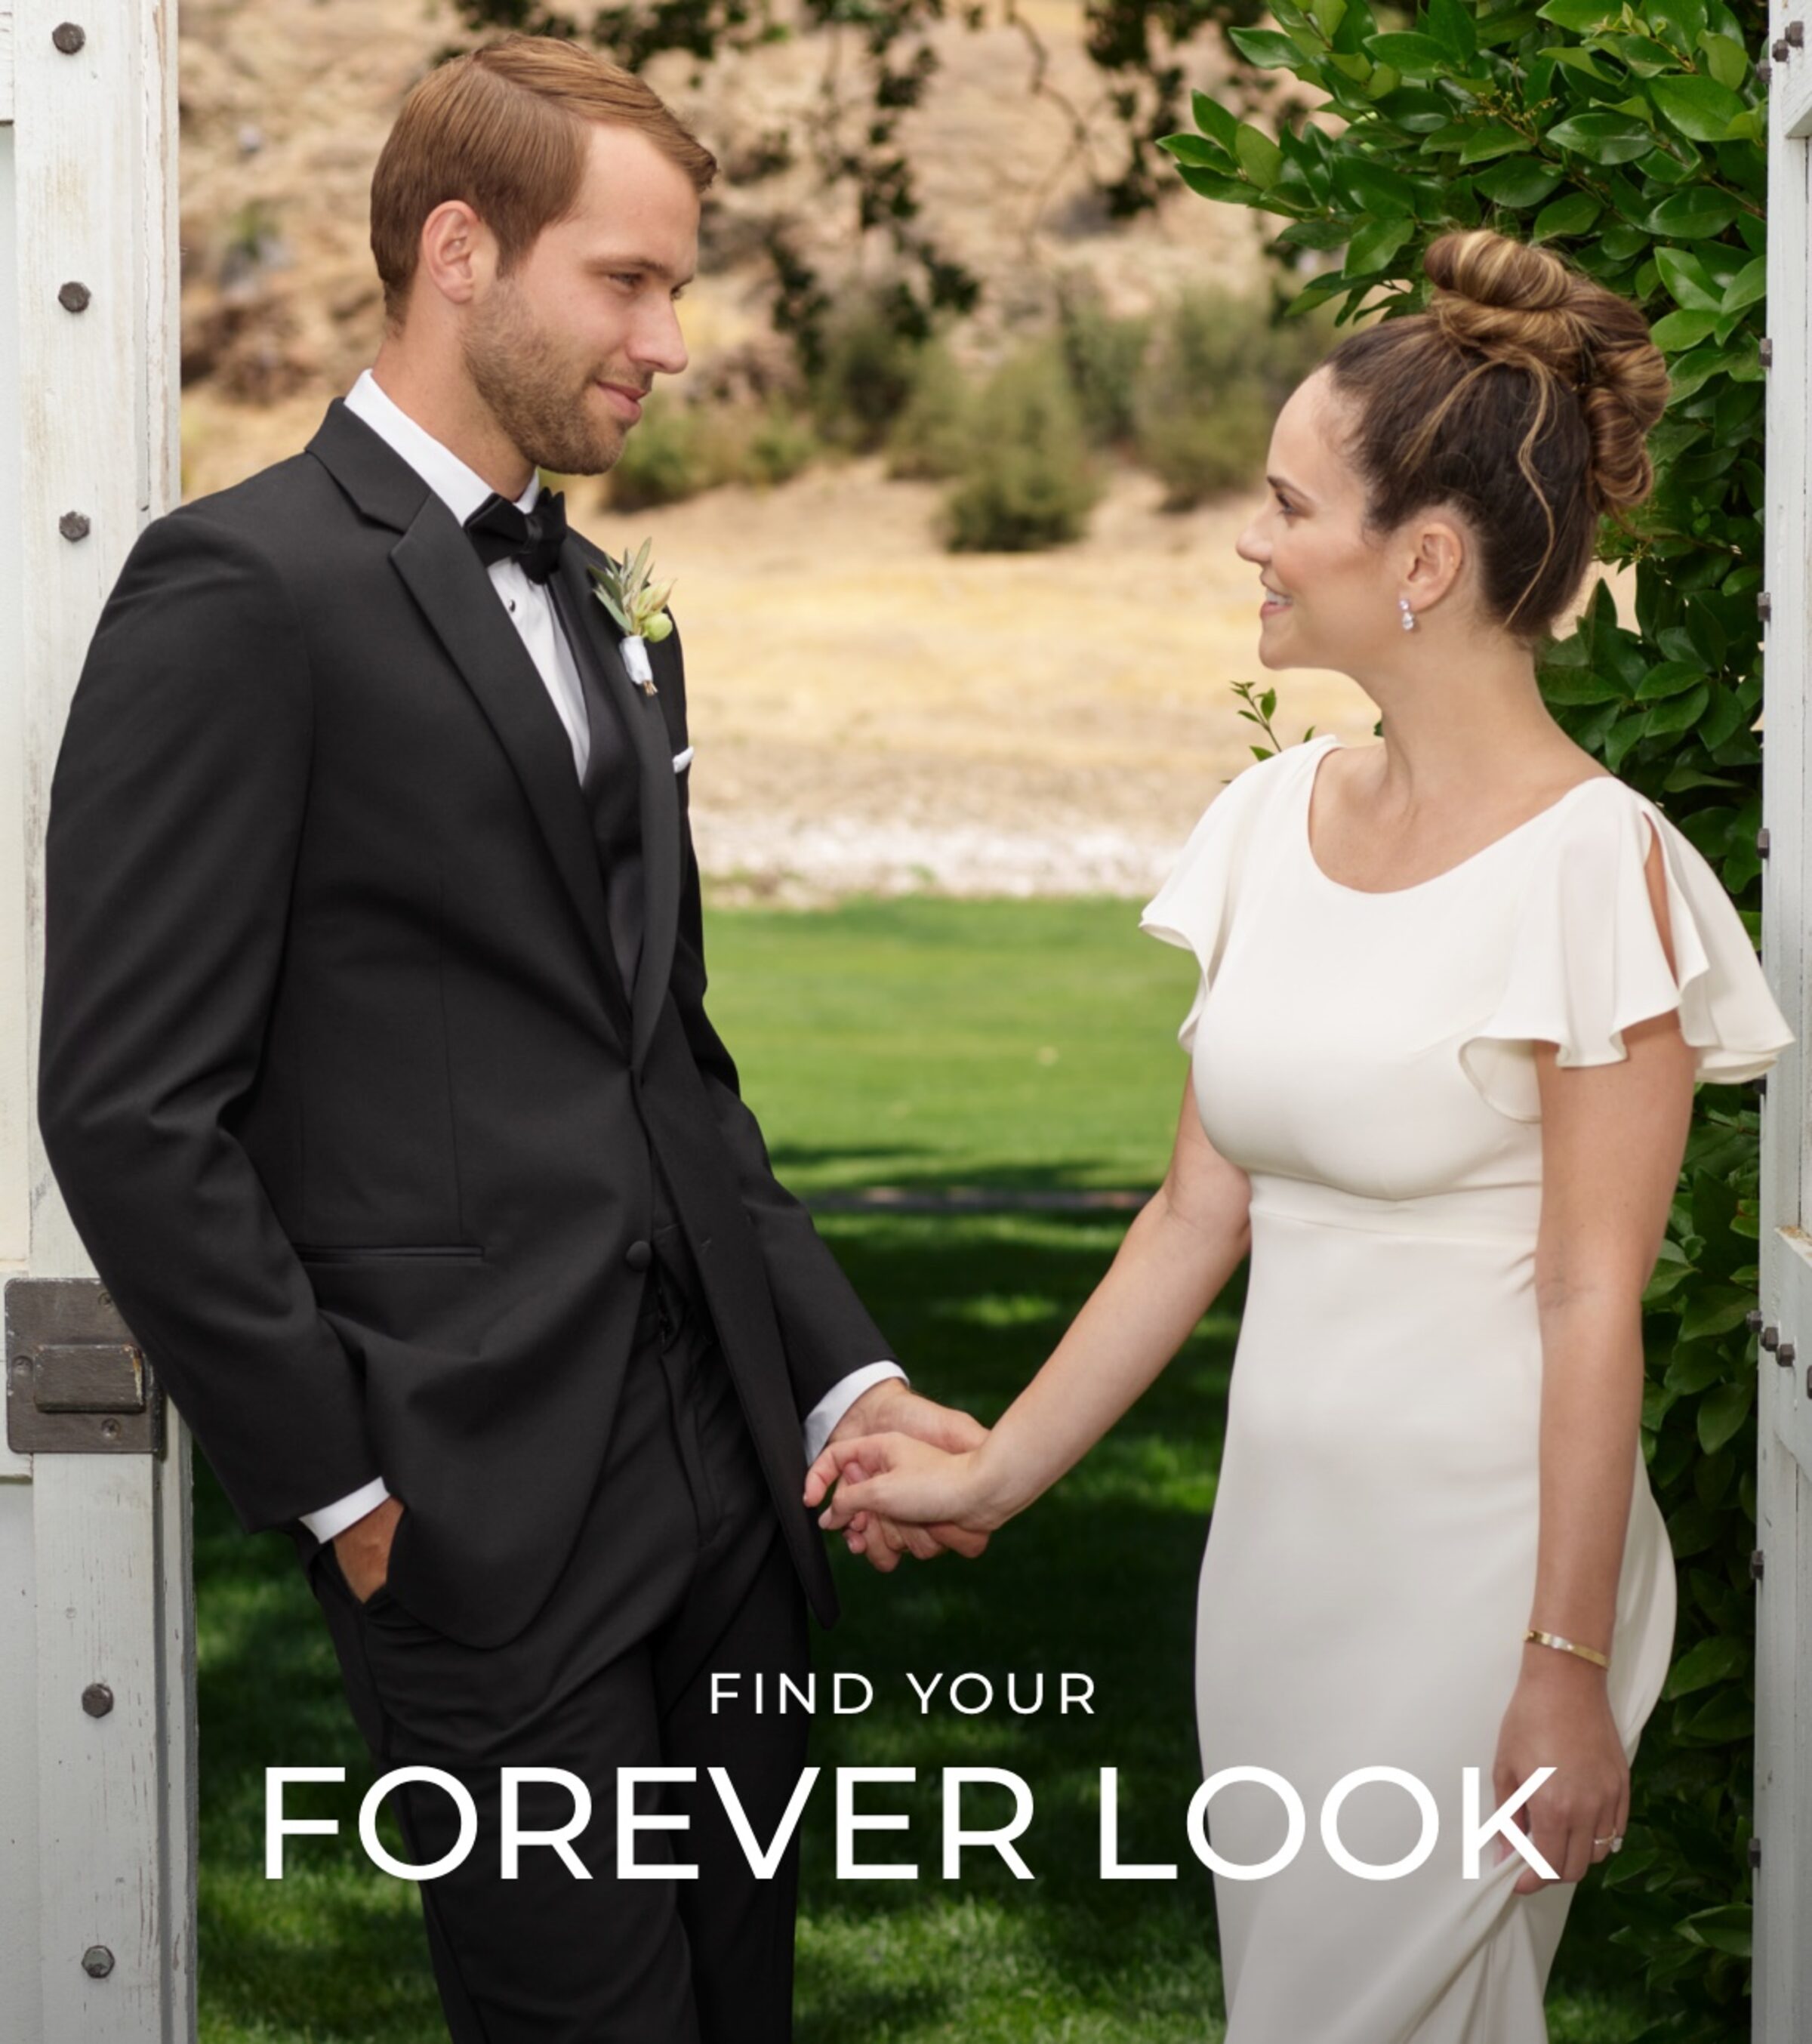 Find your forever look